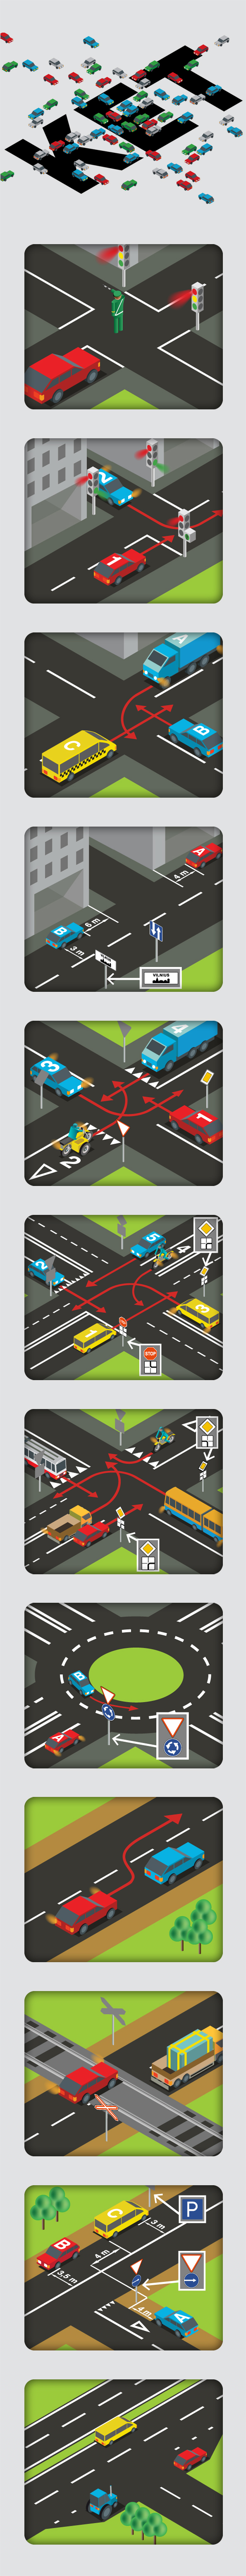 road traffic regulations Isometric app 30 degrees car Policeman road signs instructions rules